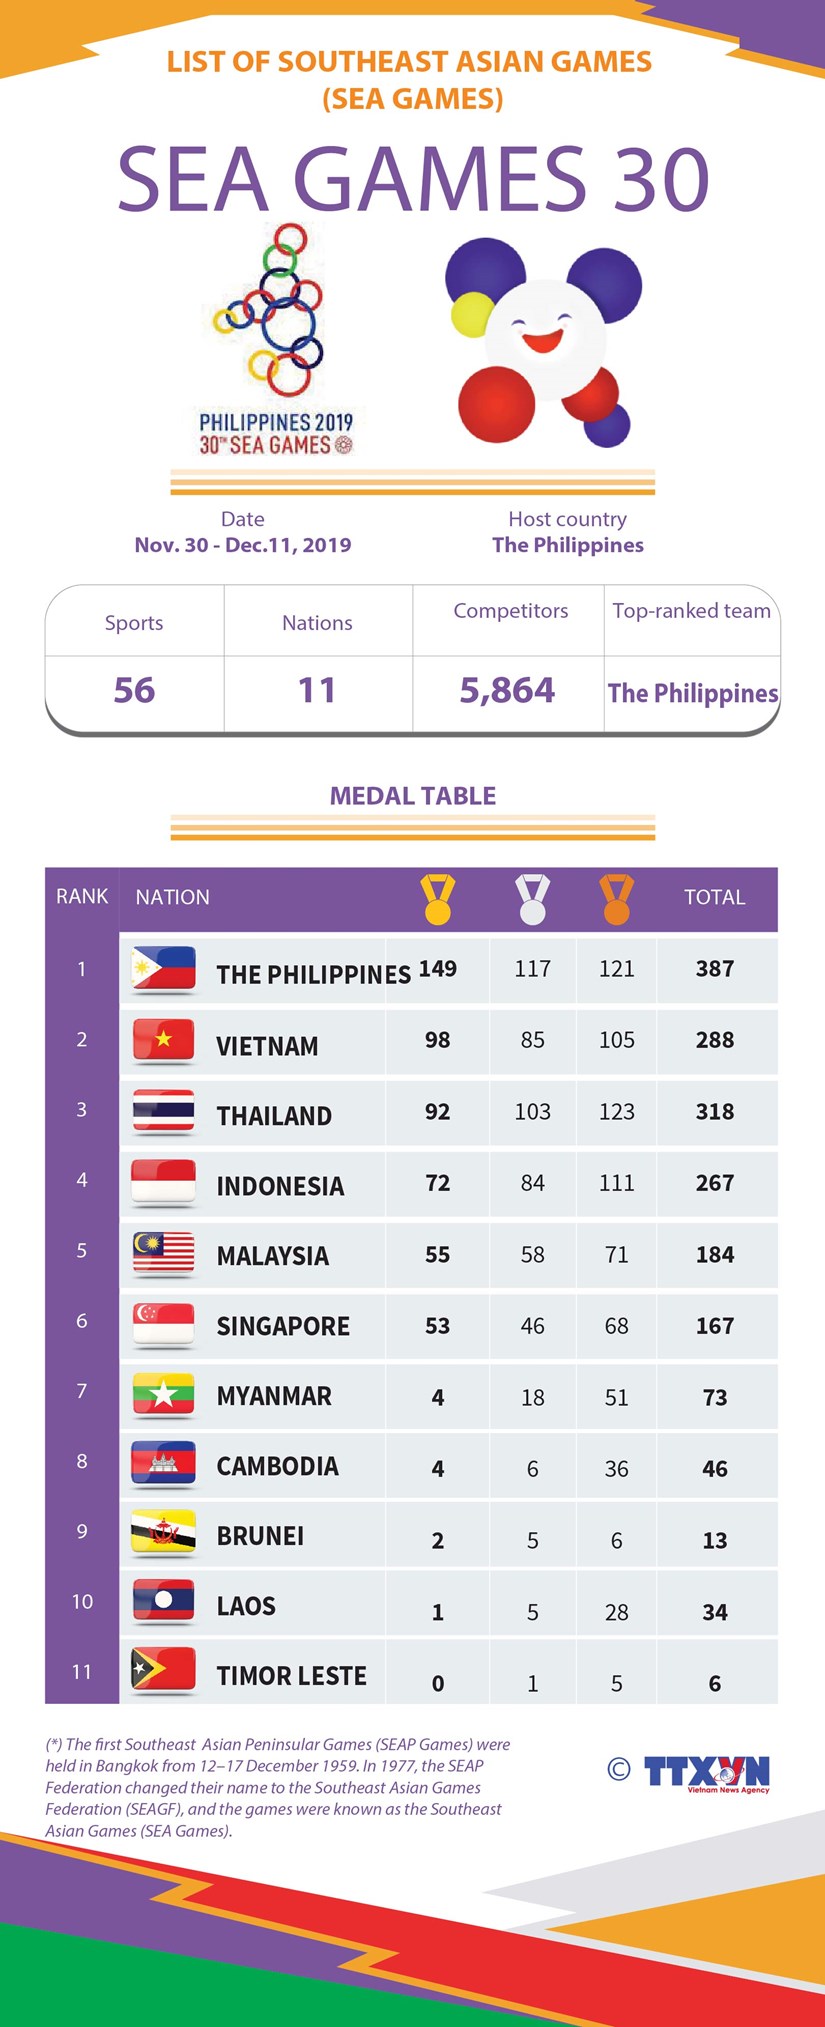 List of Southeast Asian Games: SEA Games 30 hinh anh 1